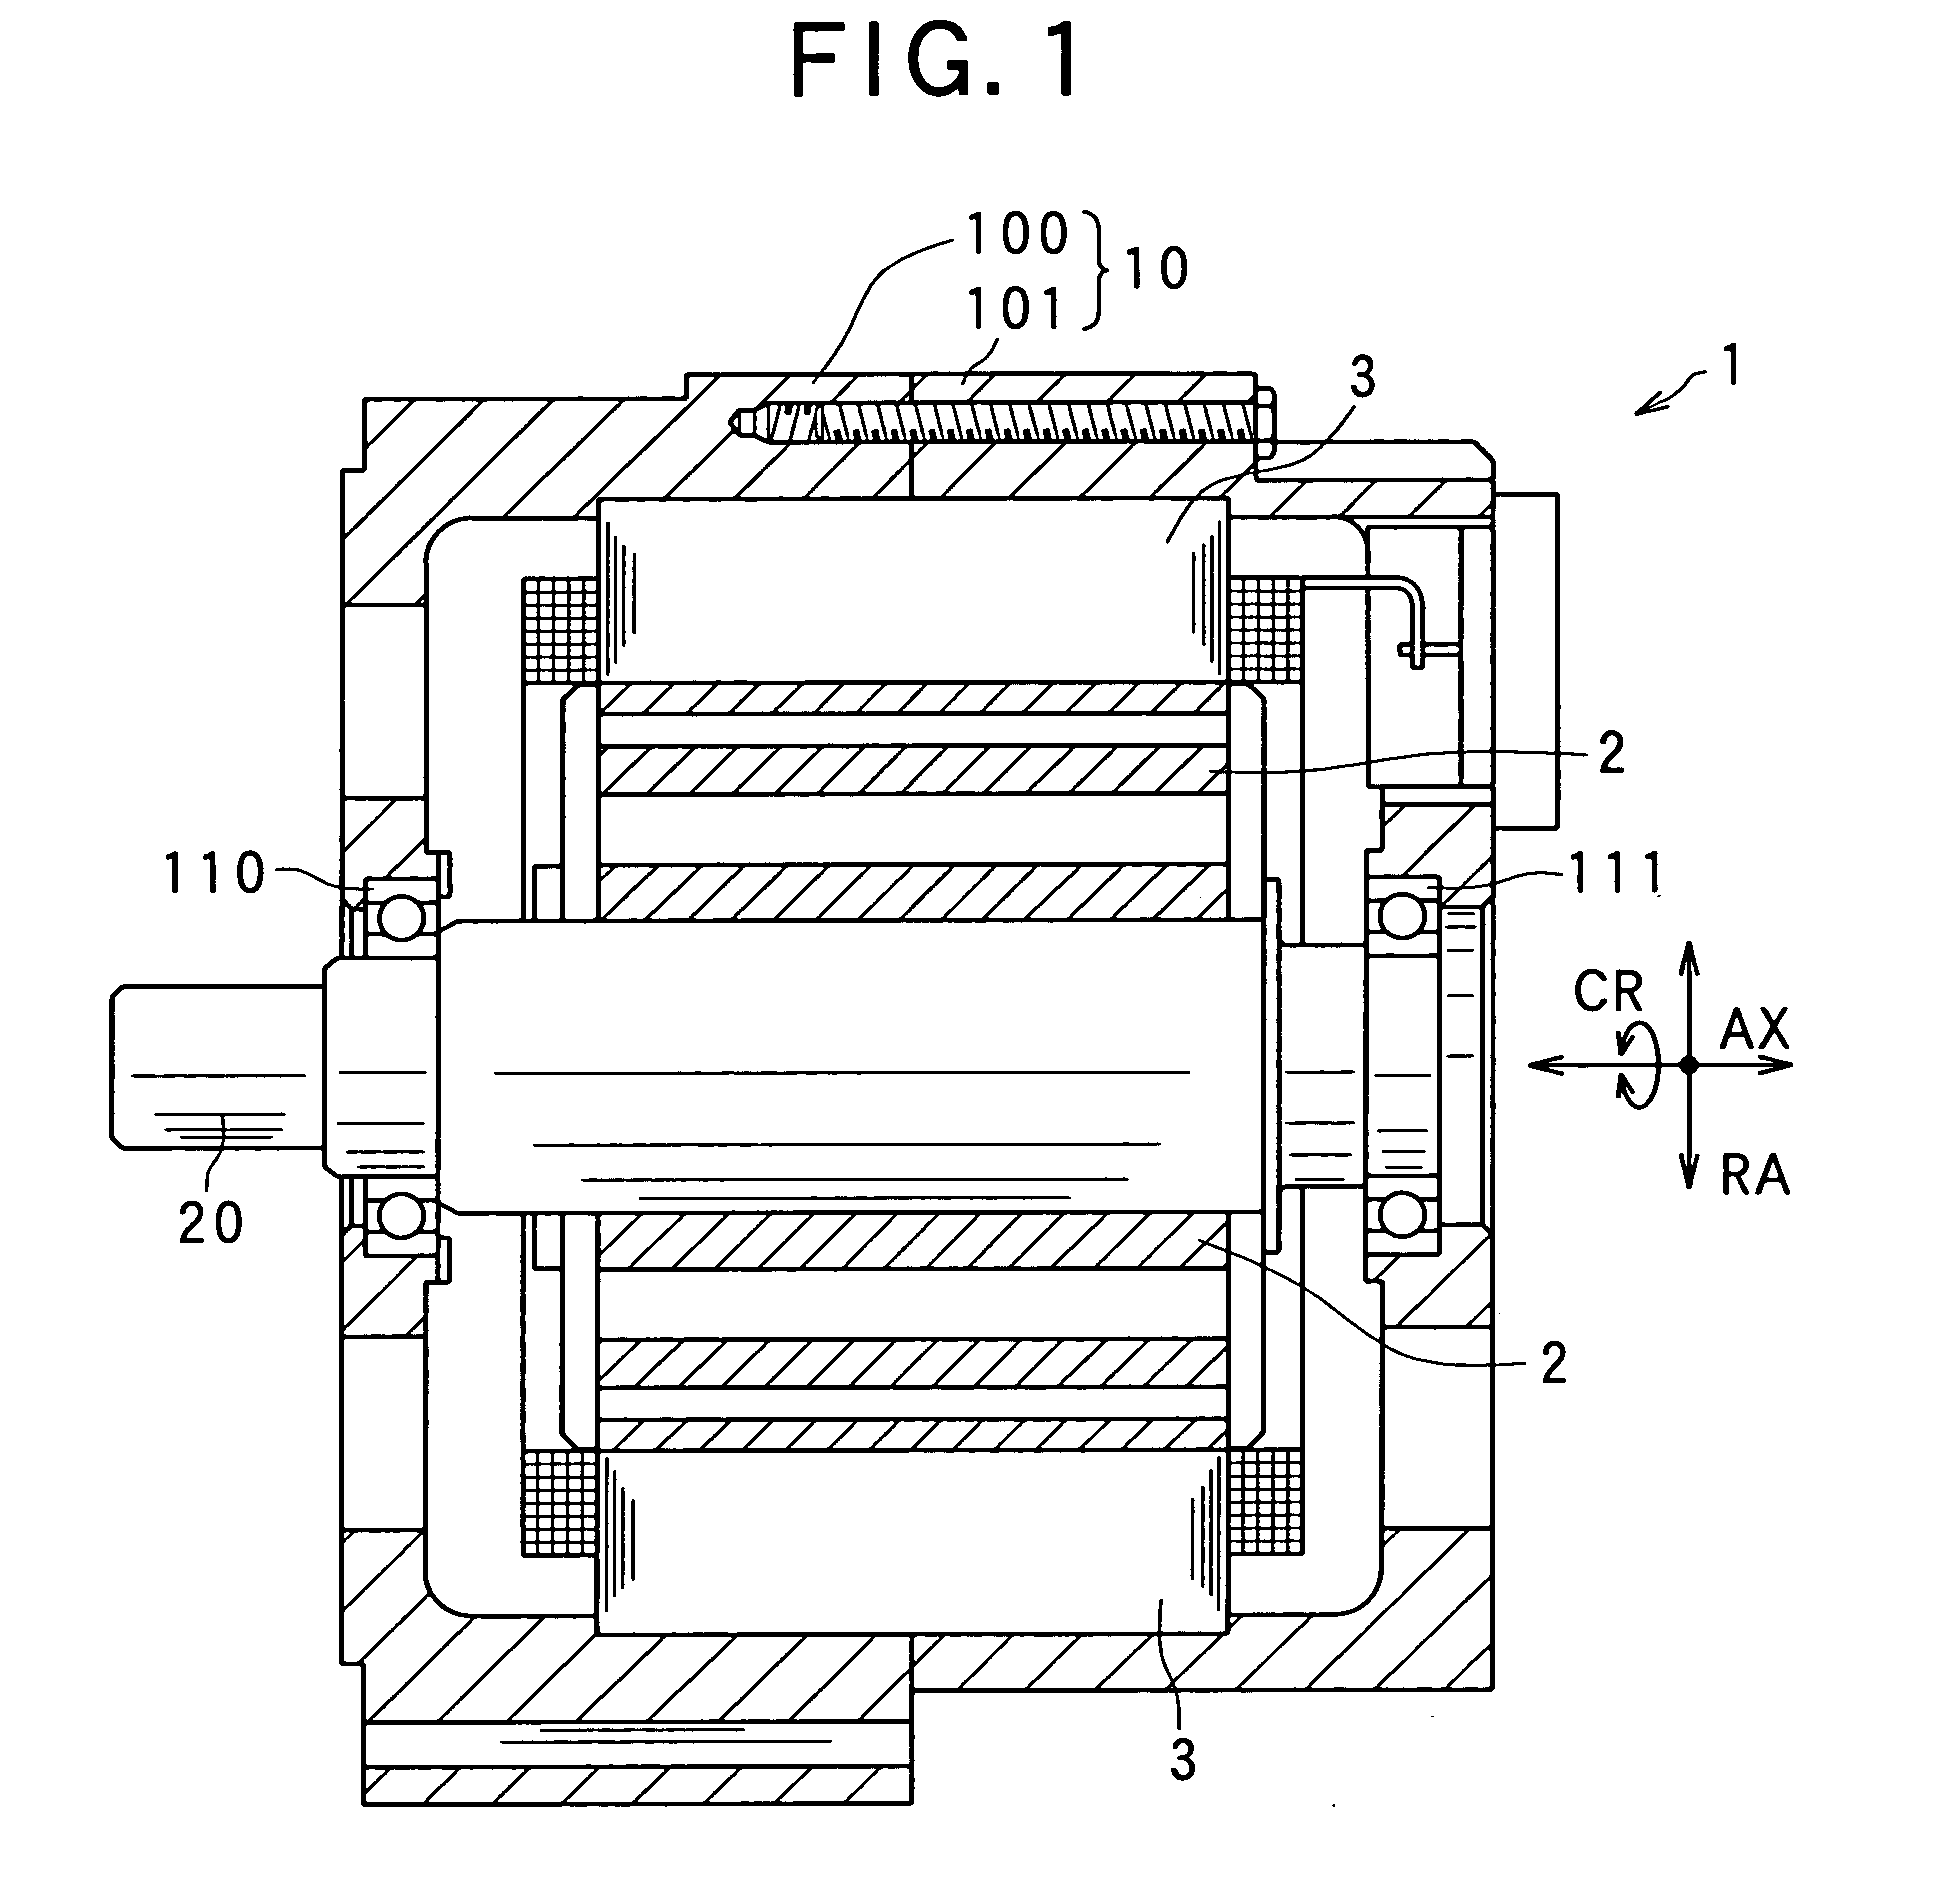 Method of manufacturing coil for stators mounted in rotary electric machines